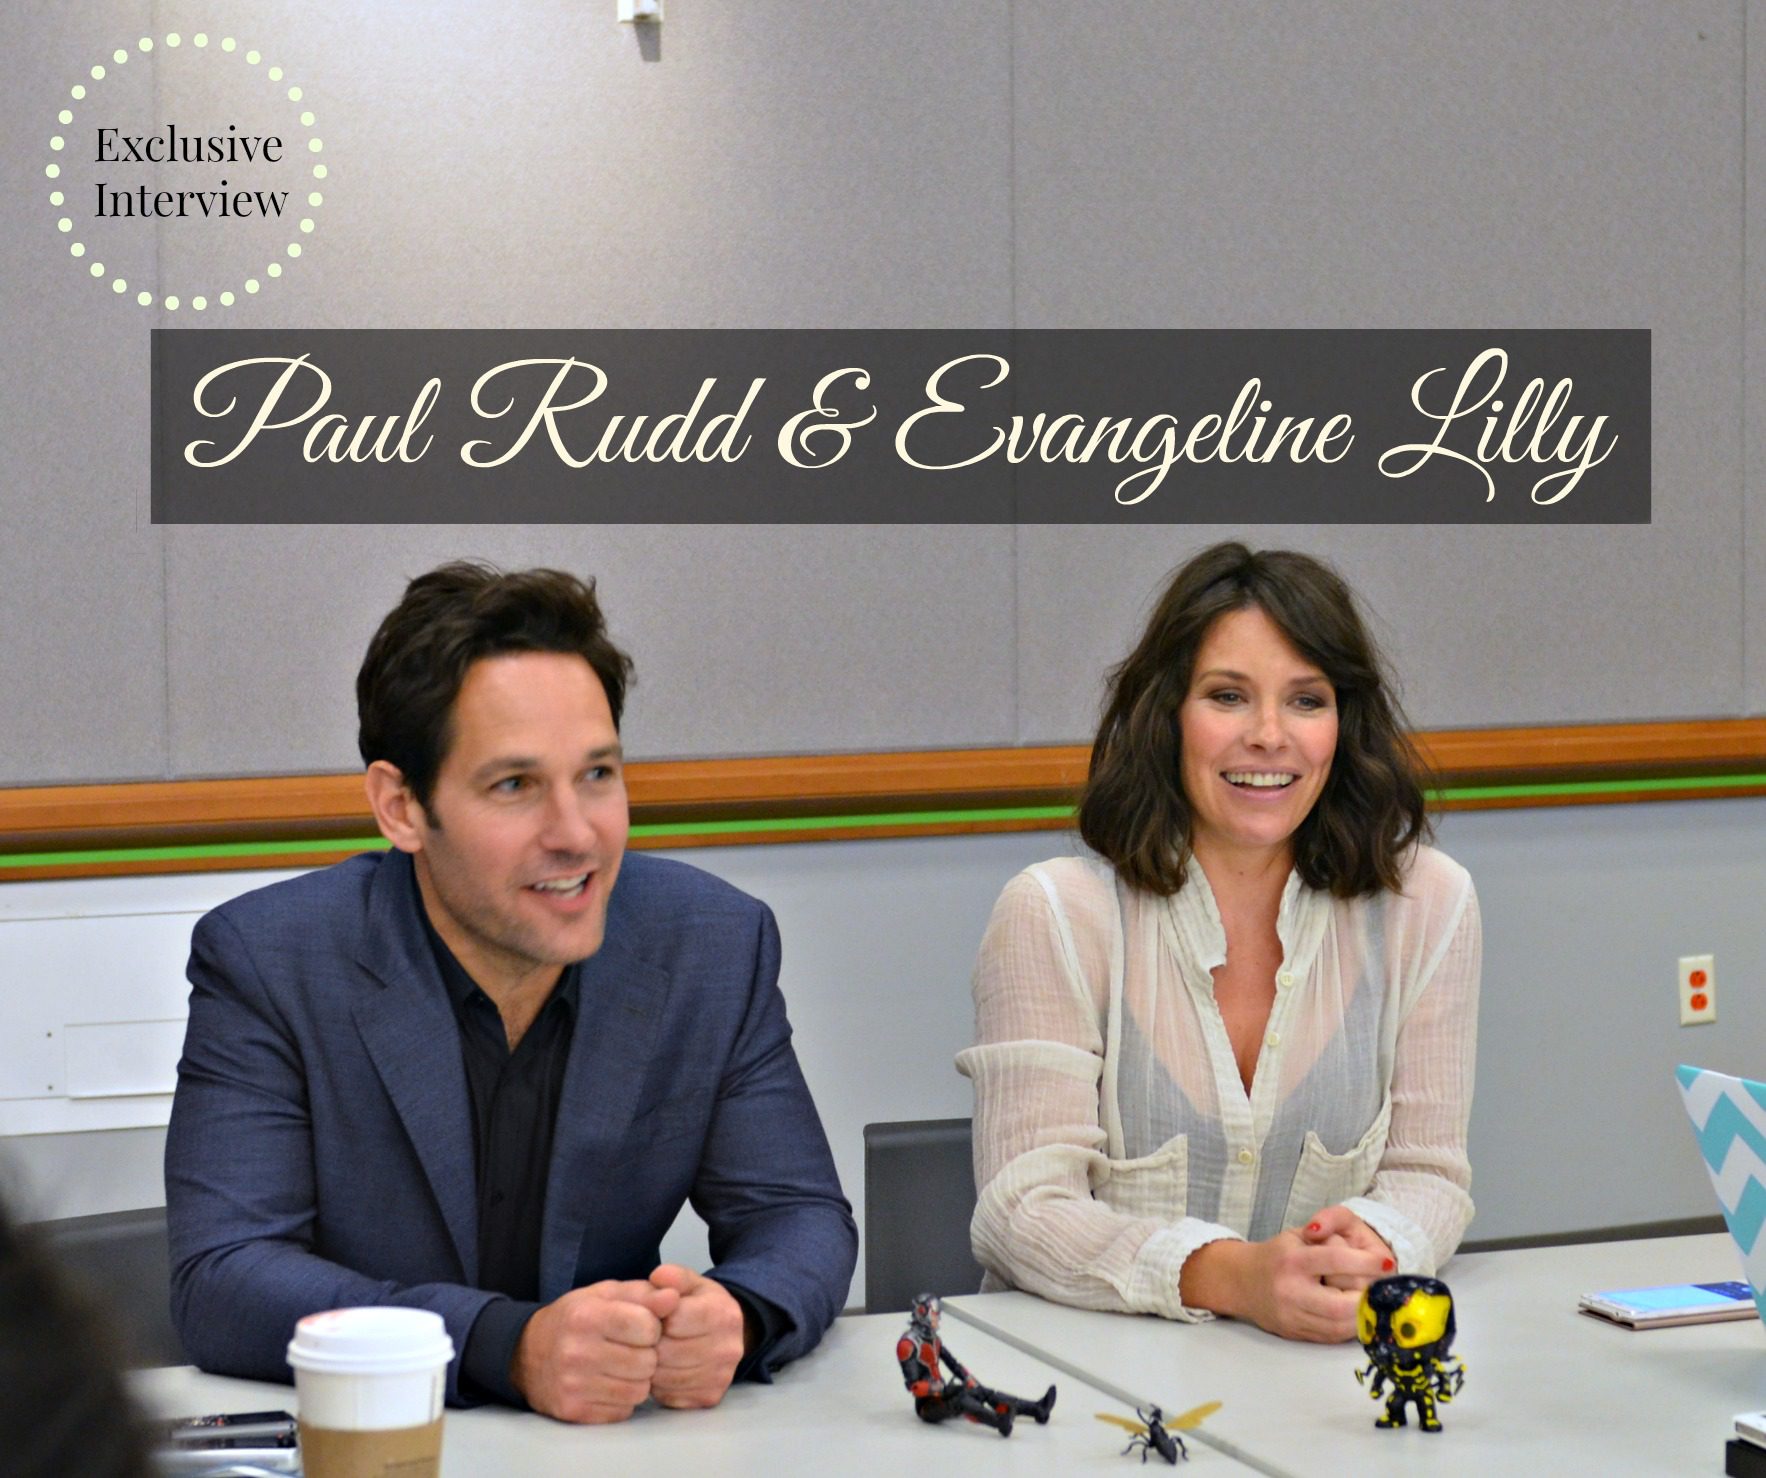 Paul Rudd & Evangeline Lilly talk Ant-Man, Punching Paul, Girl Power and Michael Douglas in this Exclusive Interview #AntManEvent